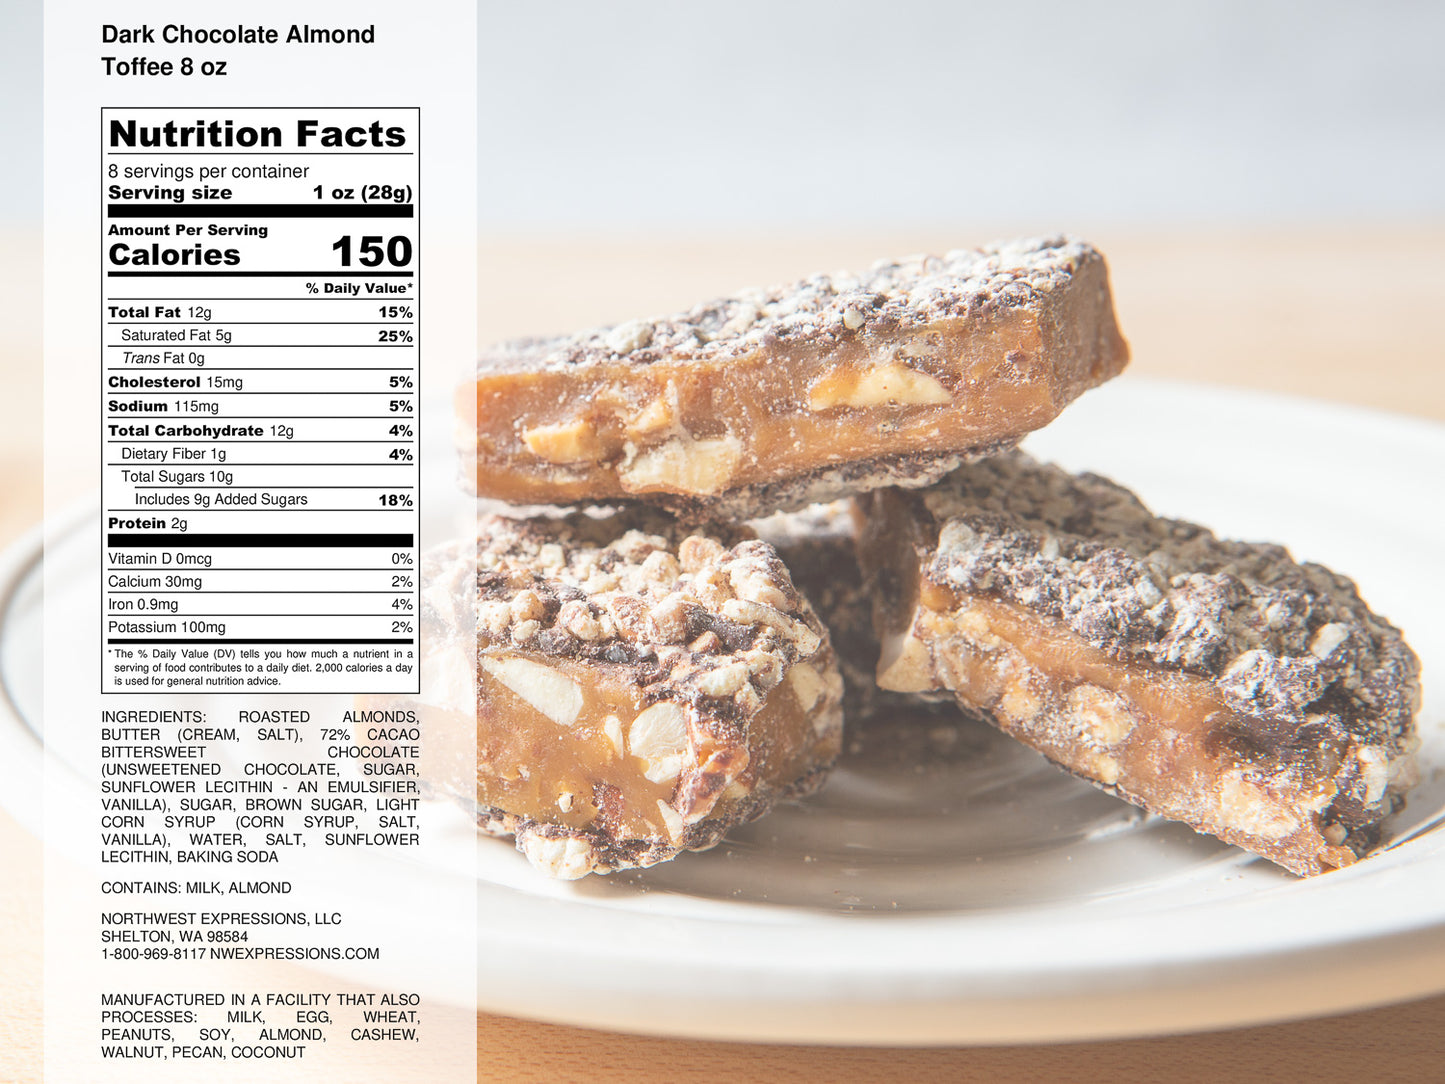 nutrition facts label for 8 oz. gift box of butter crunch almond toffee